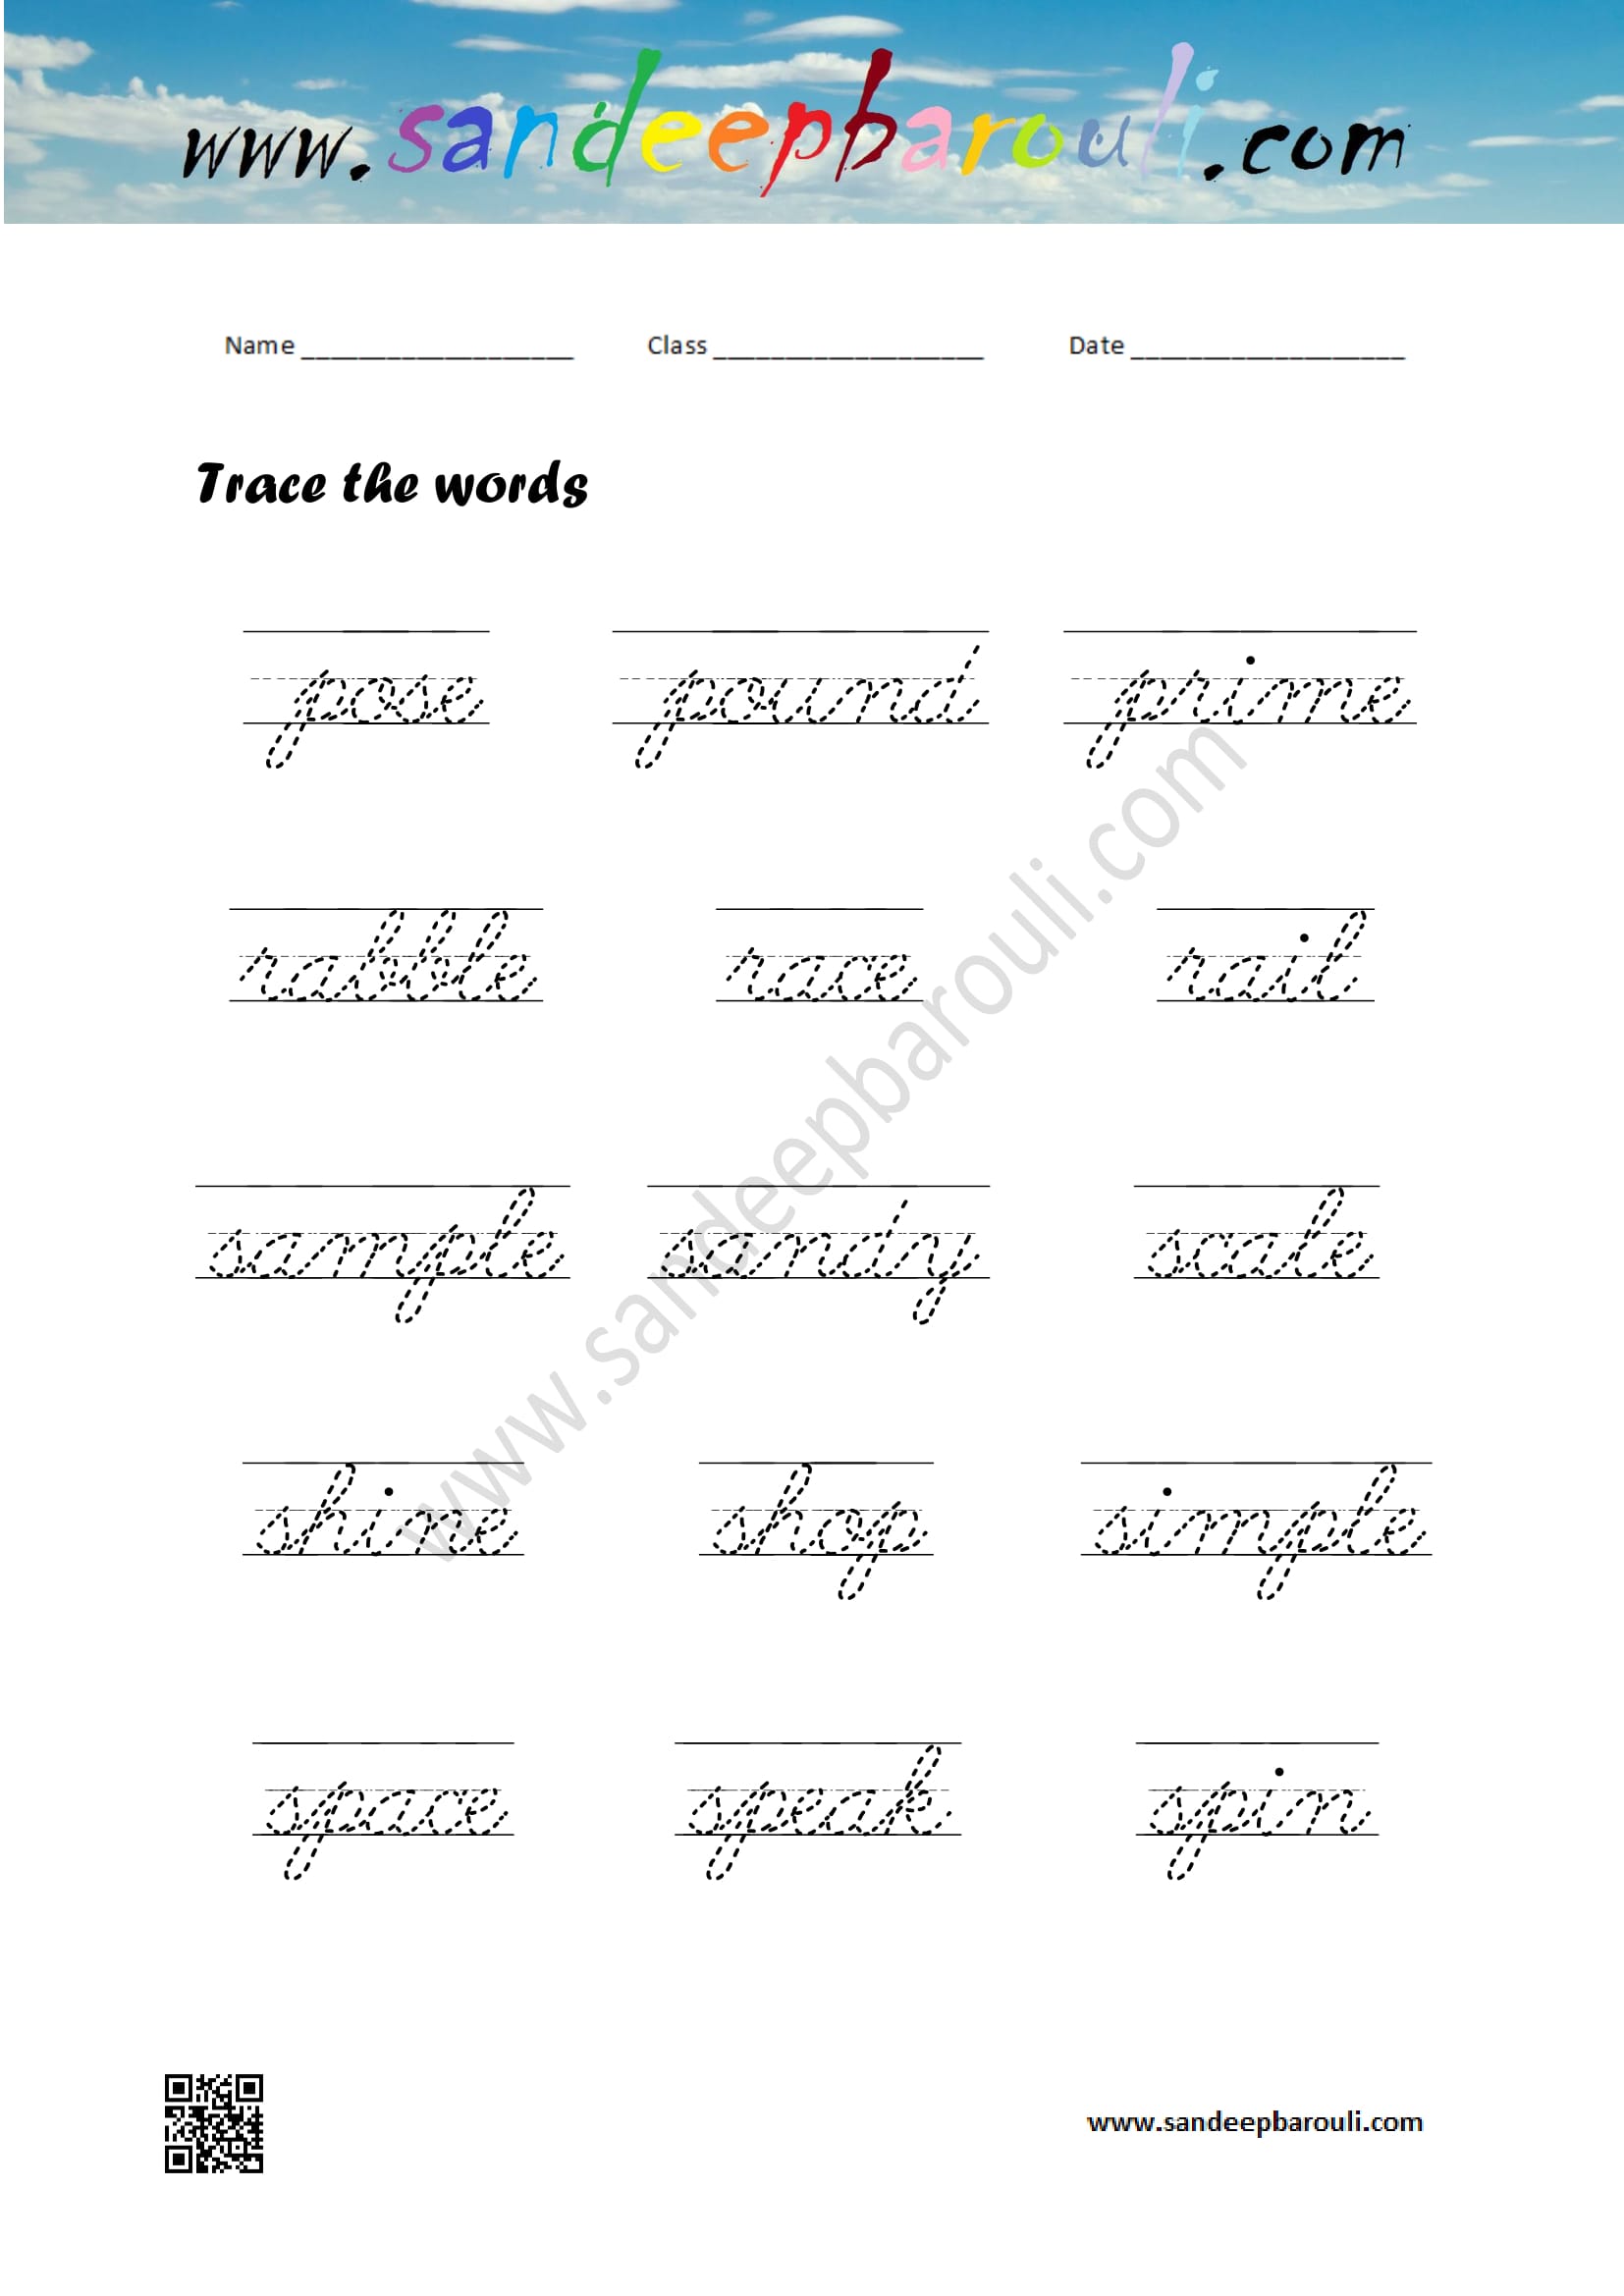 Cursive Writing Worksheet – Trace the words (67)